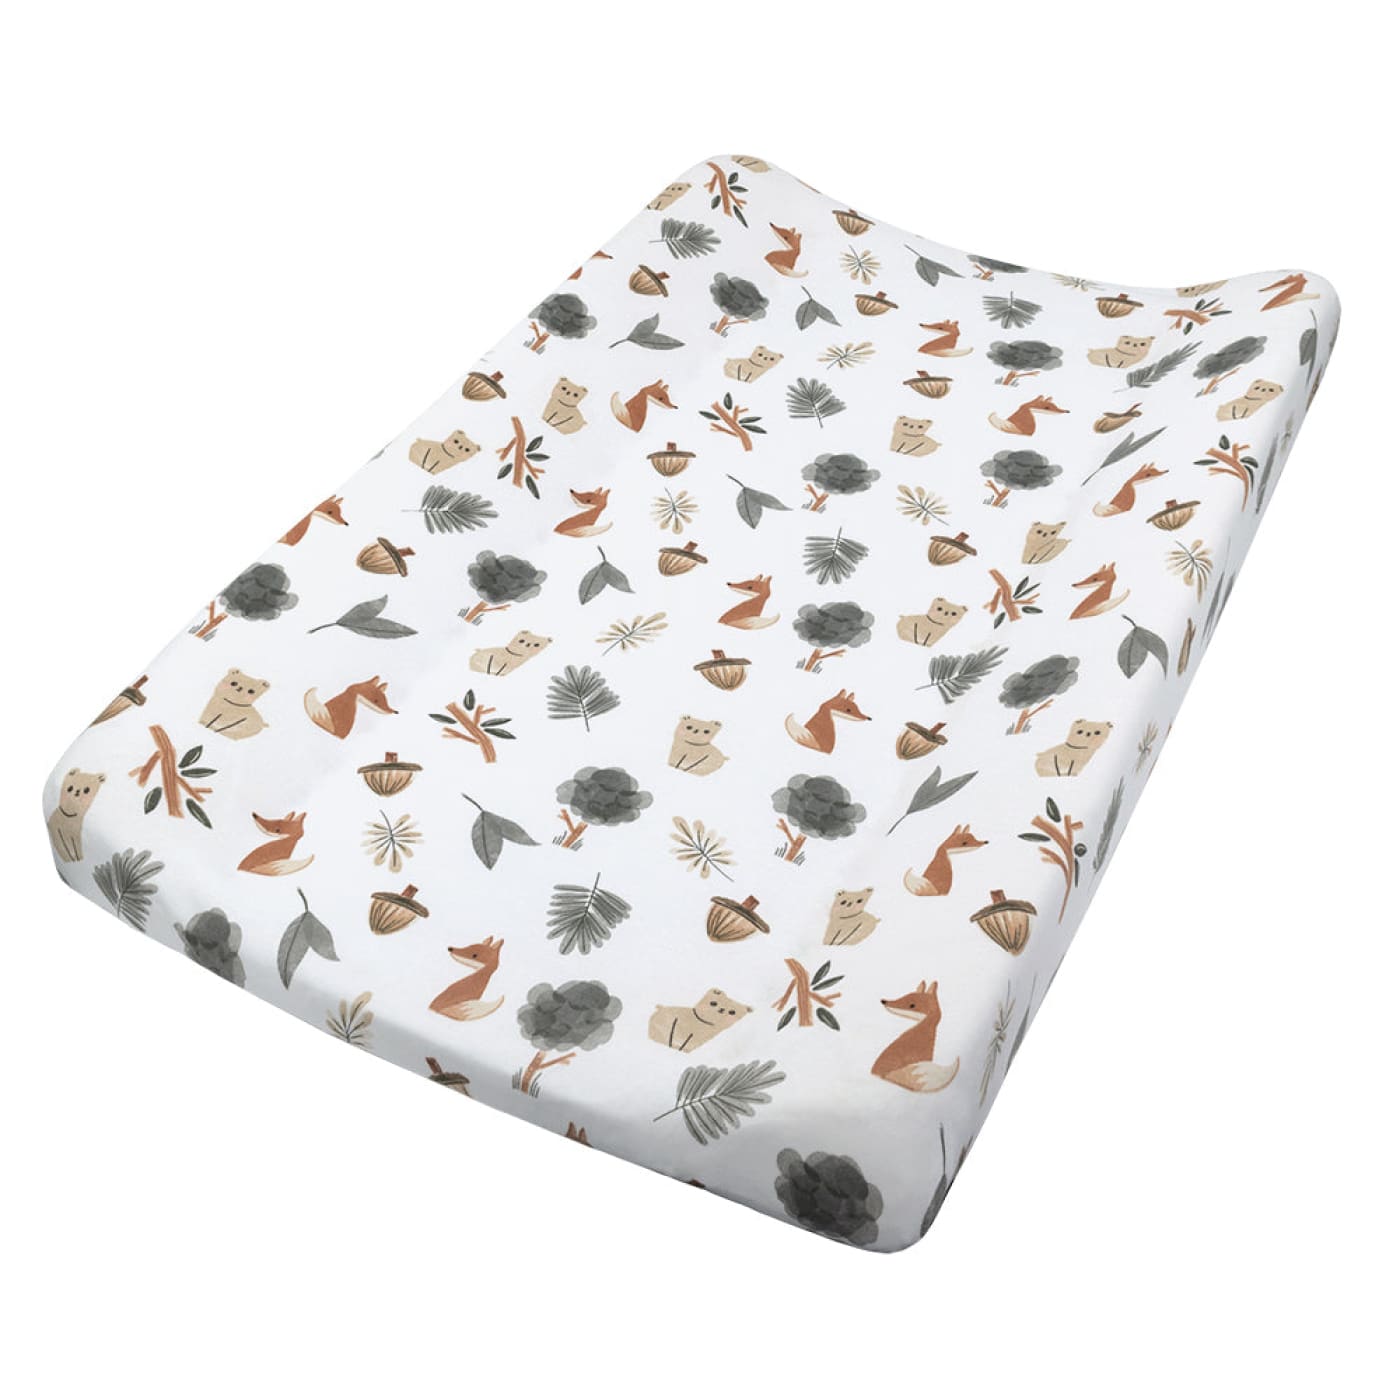 Living Textiles Jersey Change Pad Cover & Liner Set - Forest Retreat - Forest Retreat - BATHTIME & CHANGING - CHANGE MATS/COVERS